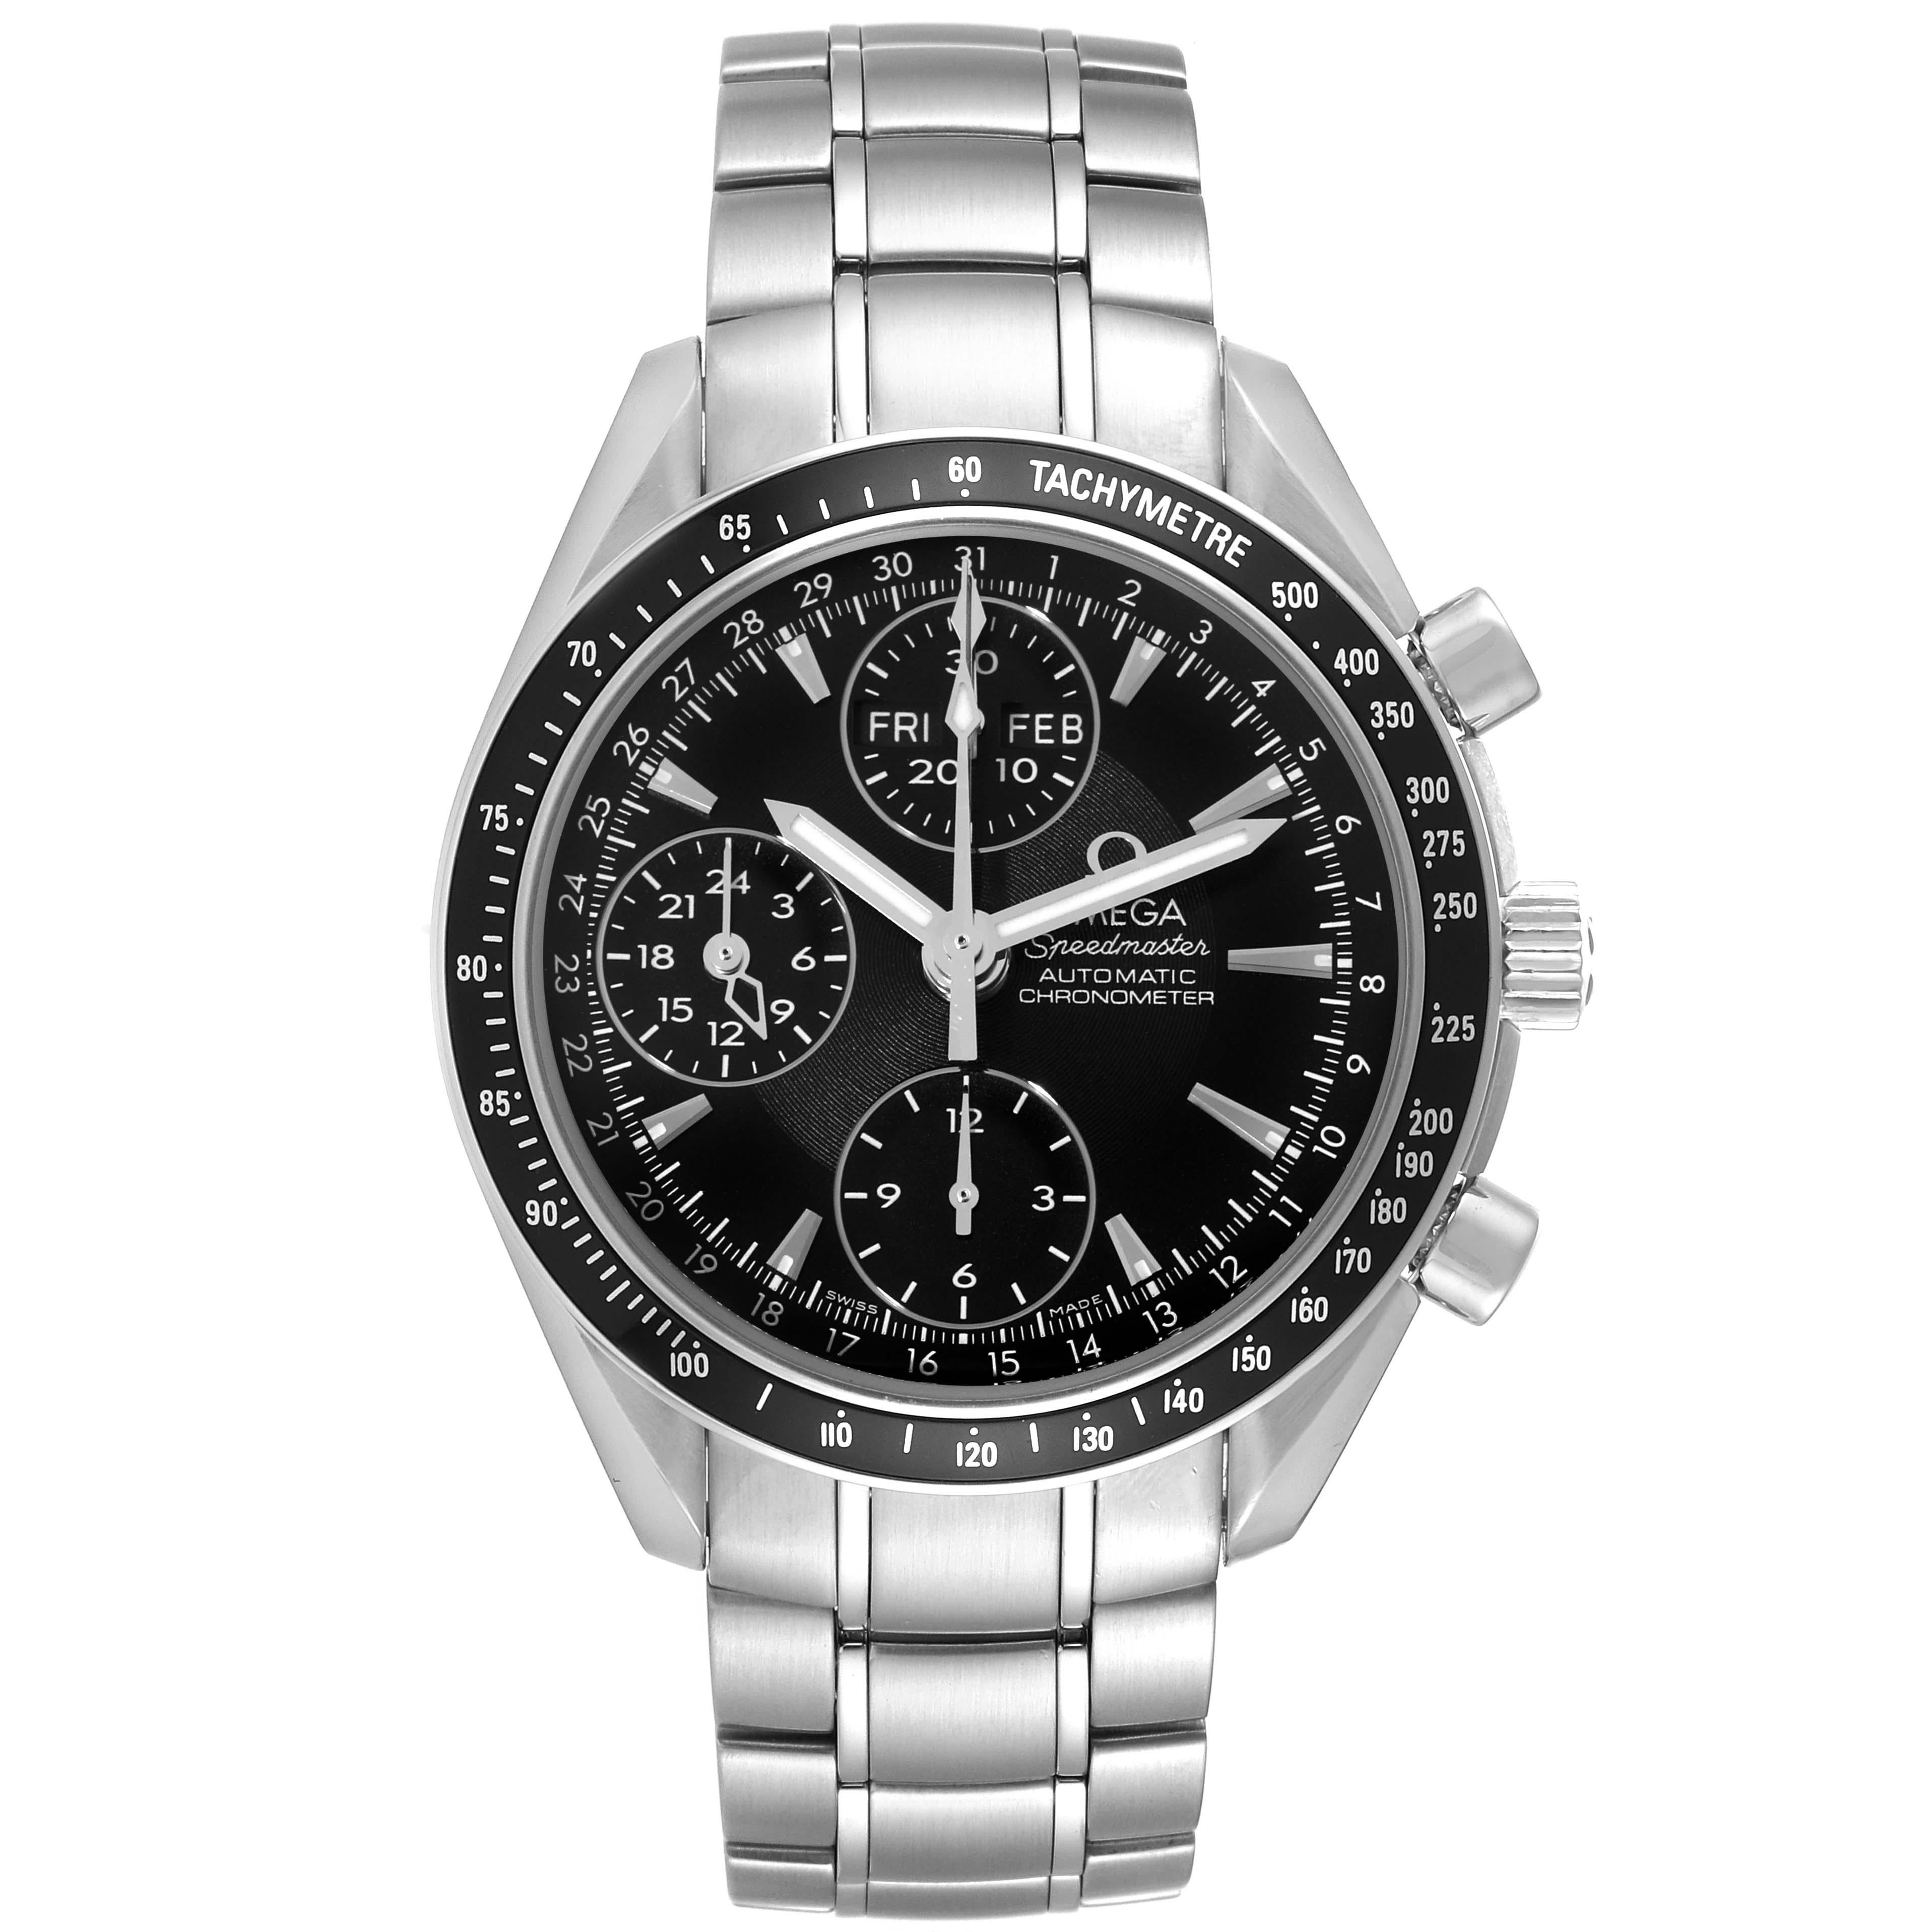 Omega Speedmaster Day-Date 40 Steel Chronograph Mens Watch 3220.50.00 Card. Automatic self-winding chronograph movement. Stainless steel round case 40 mm in diameter. Stainless steel bezel with black tachymeter insert. Anti-reflective scratch